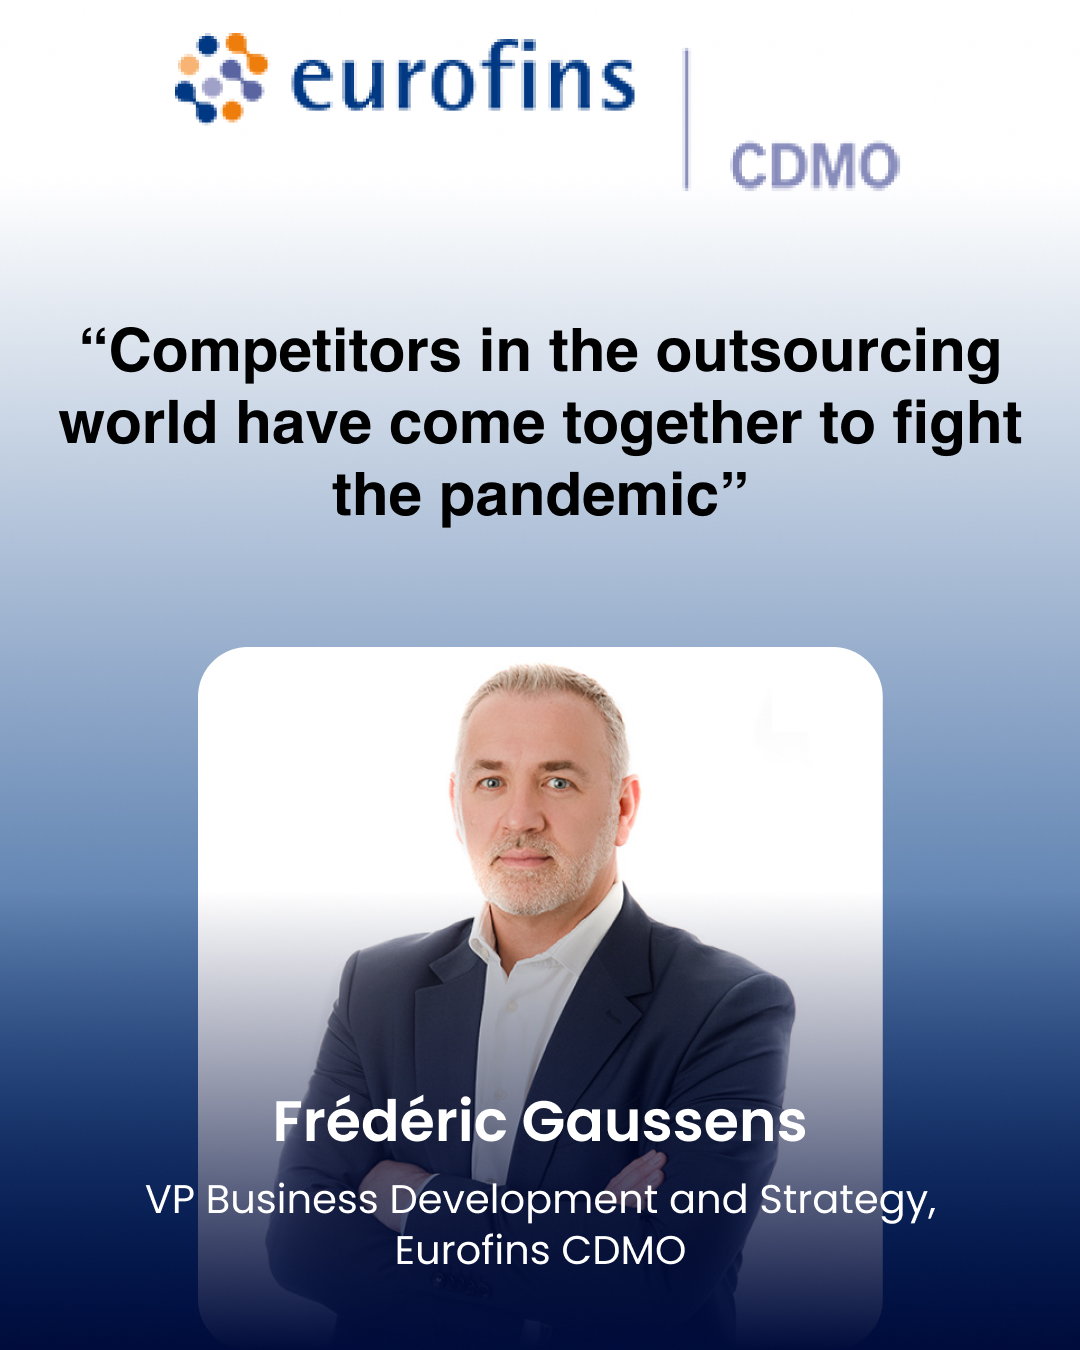 “Competitors in the outsourcing world have come together to fight the pandemic”